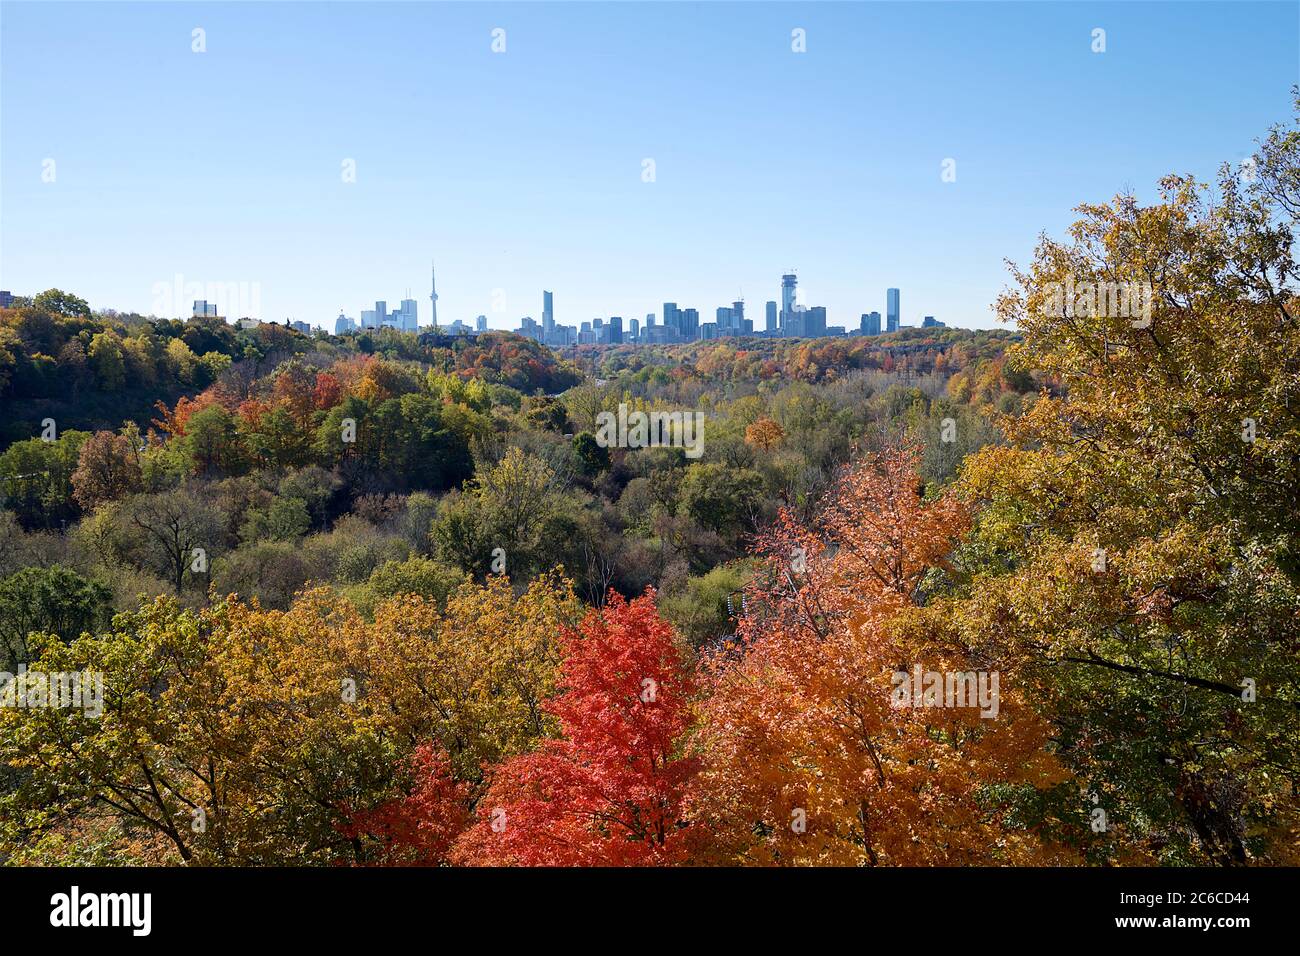 Urban skyline with autumn leaf color in the valley Stock Photo